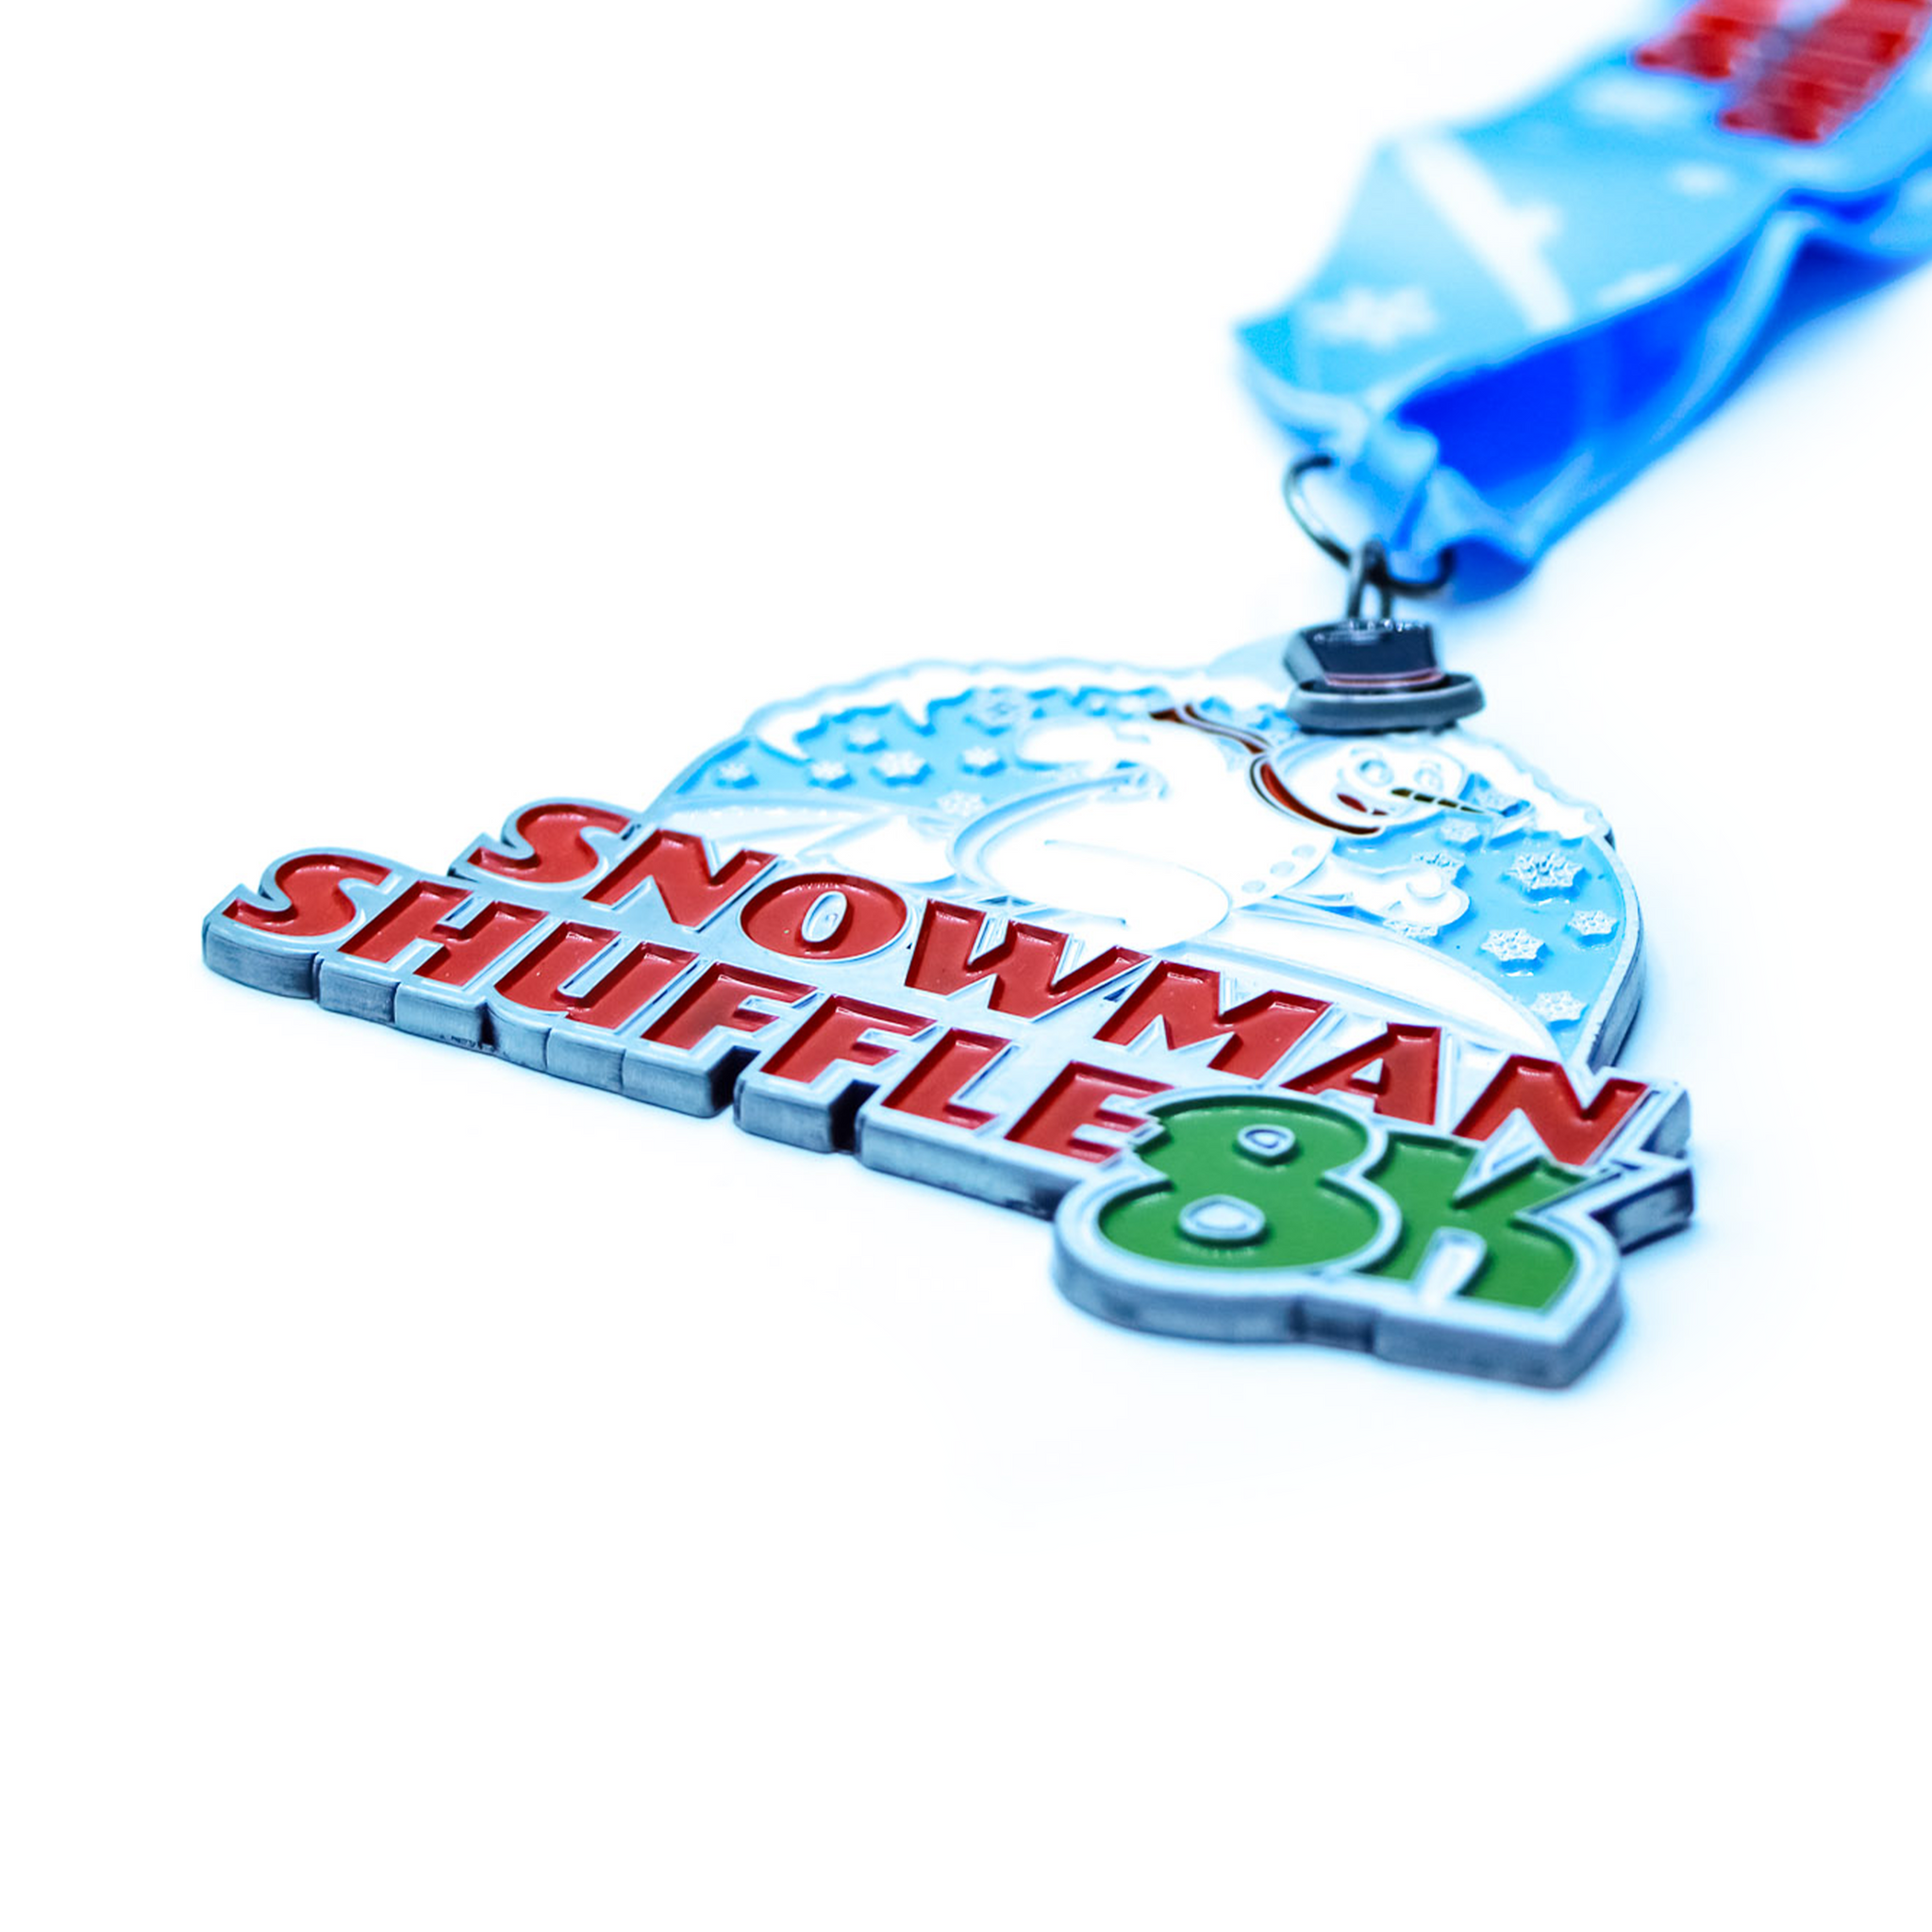 Holiday Series: Snowman Shuffle 8K - Entry + Medal